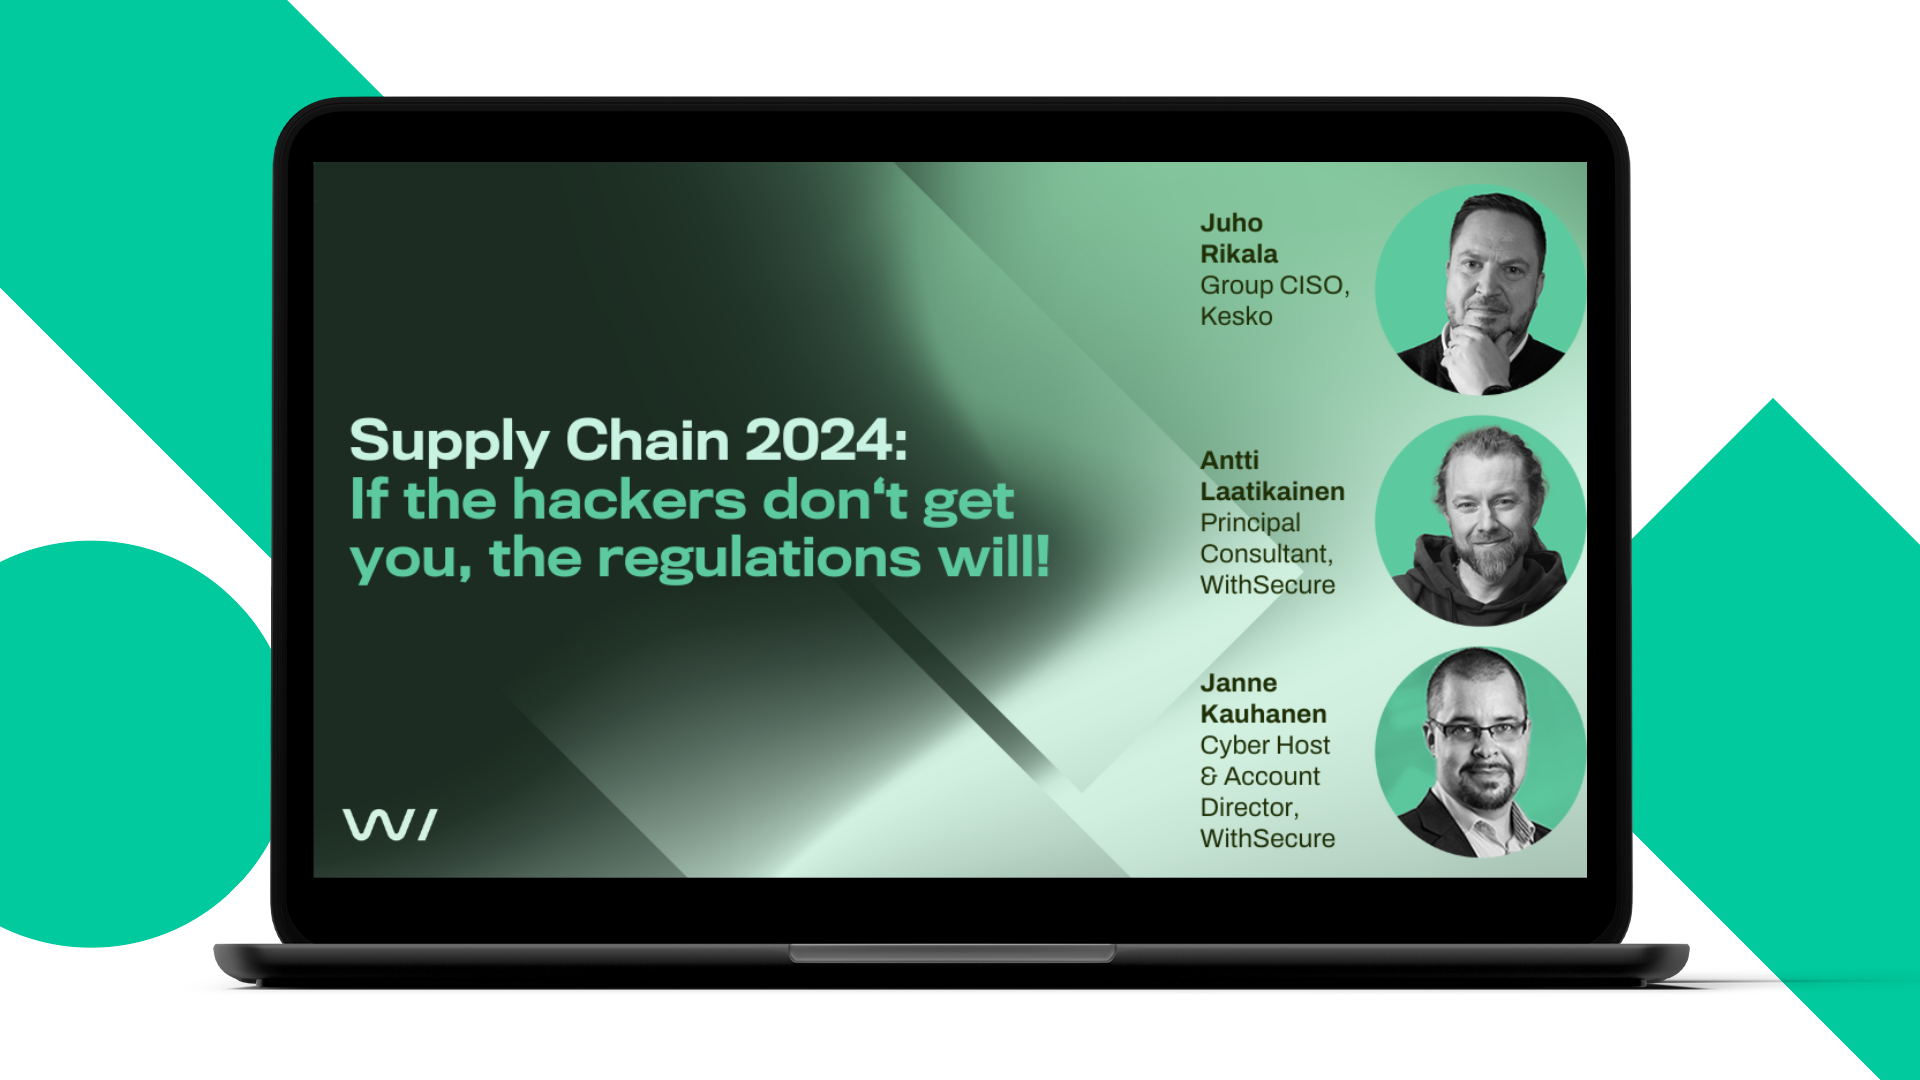 Supply Chain 2024: If the hackers don’t get you, the regulations will!